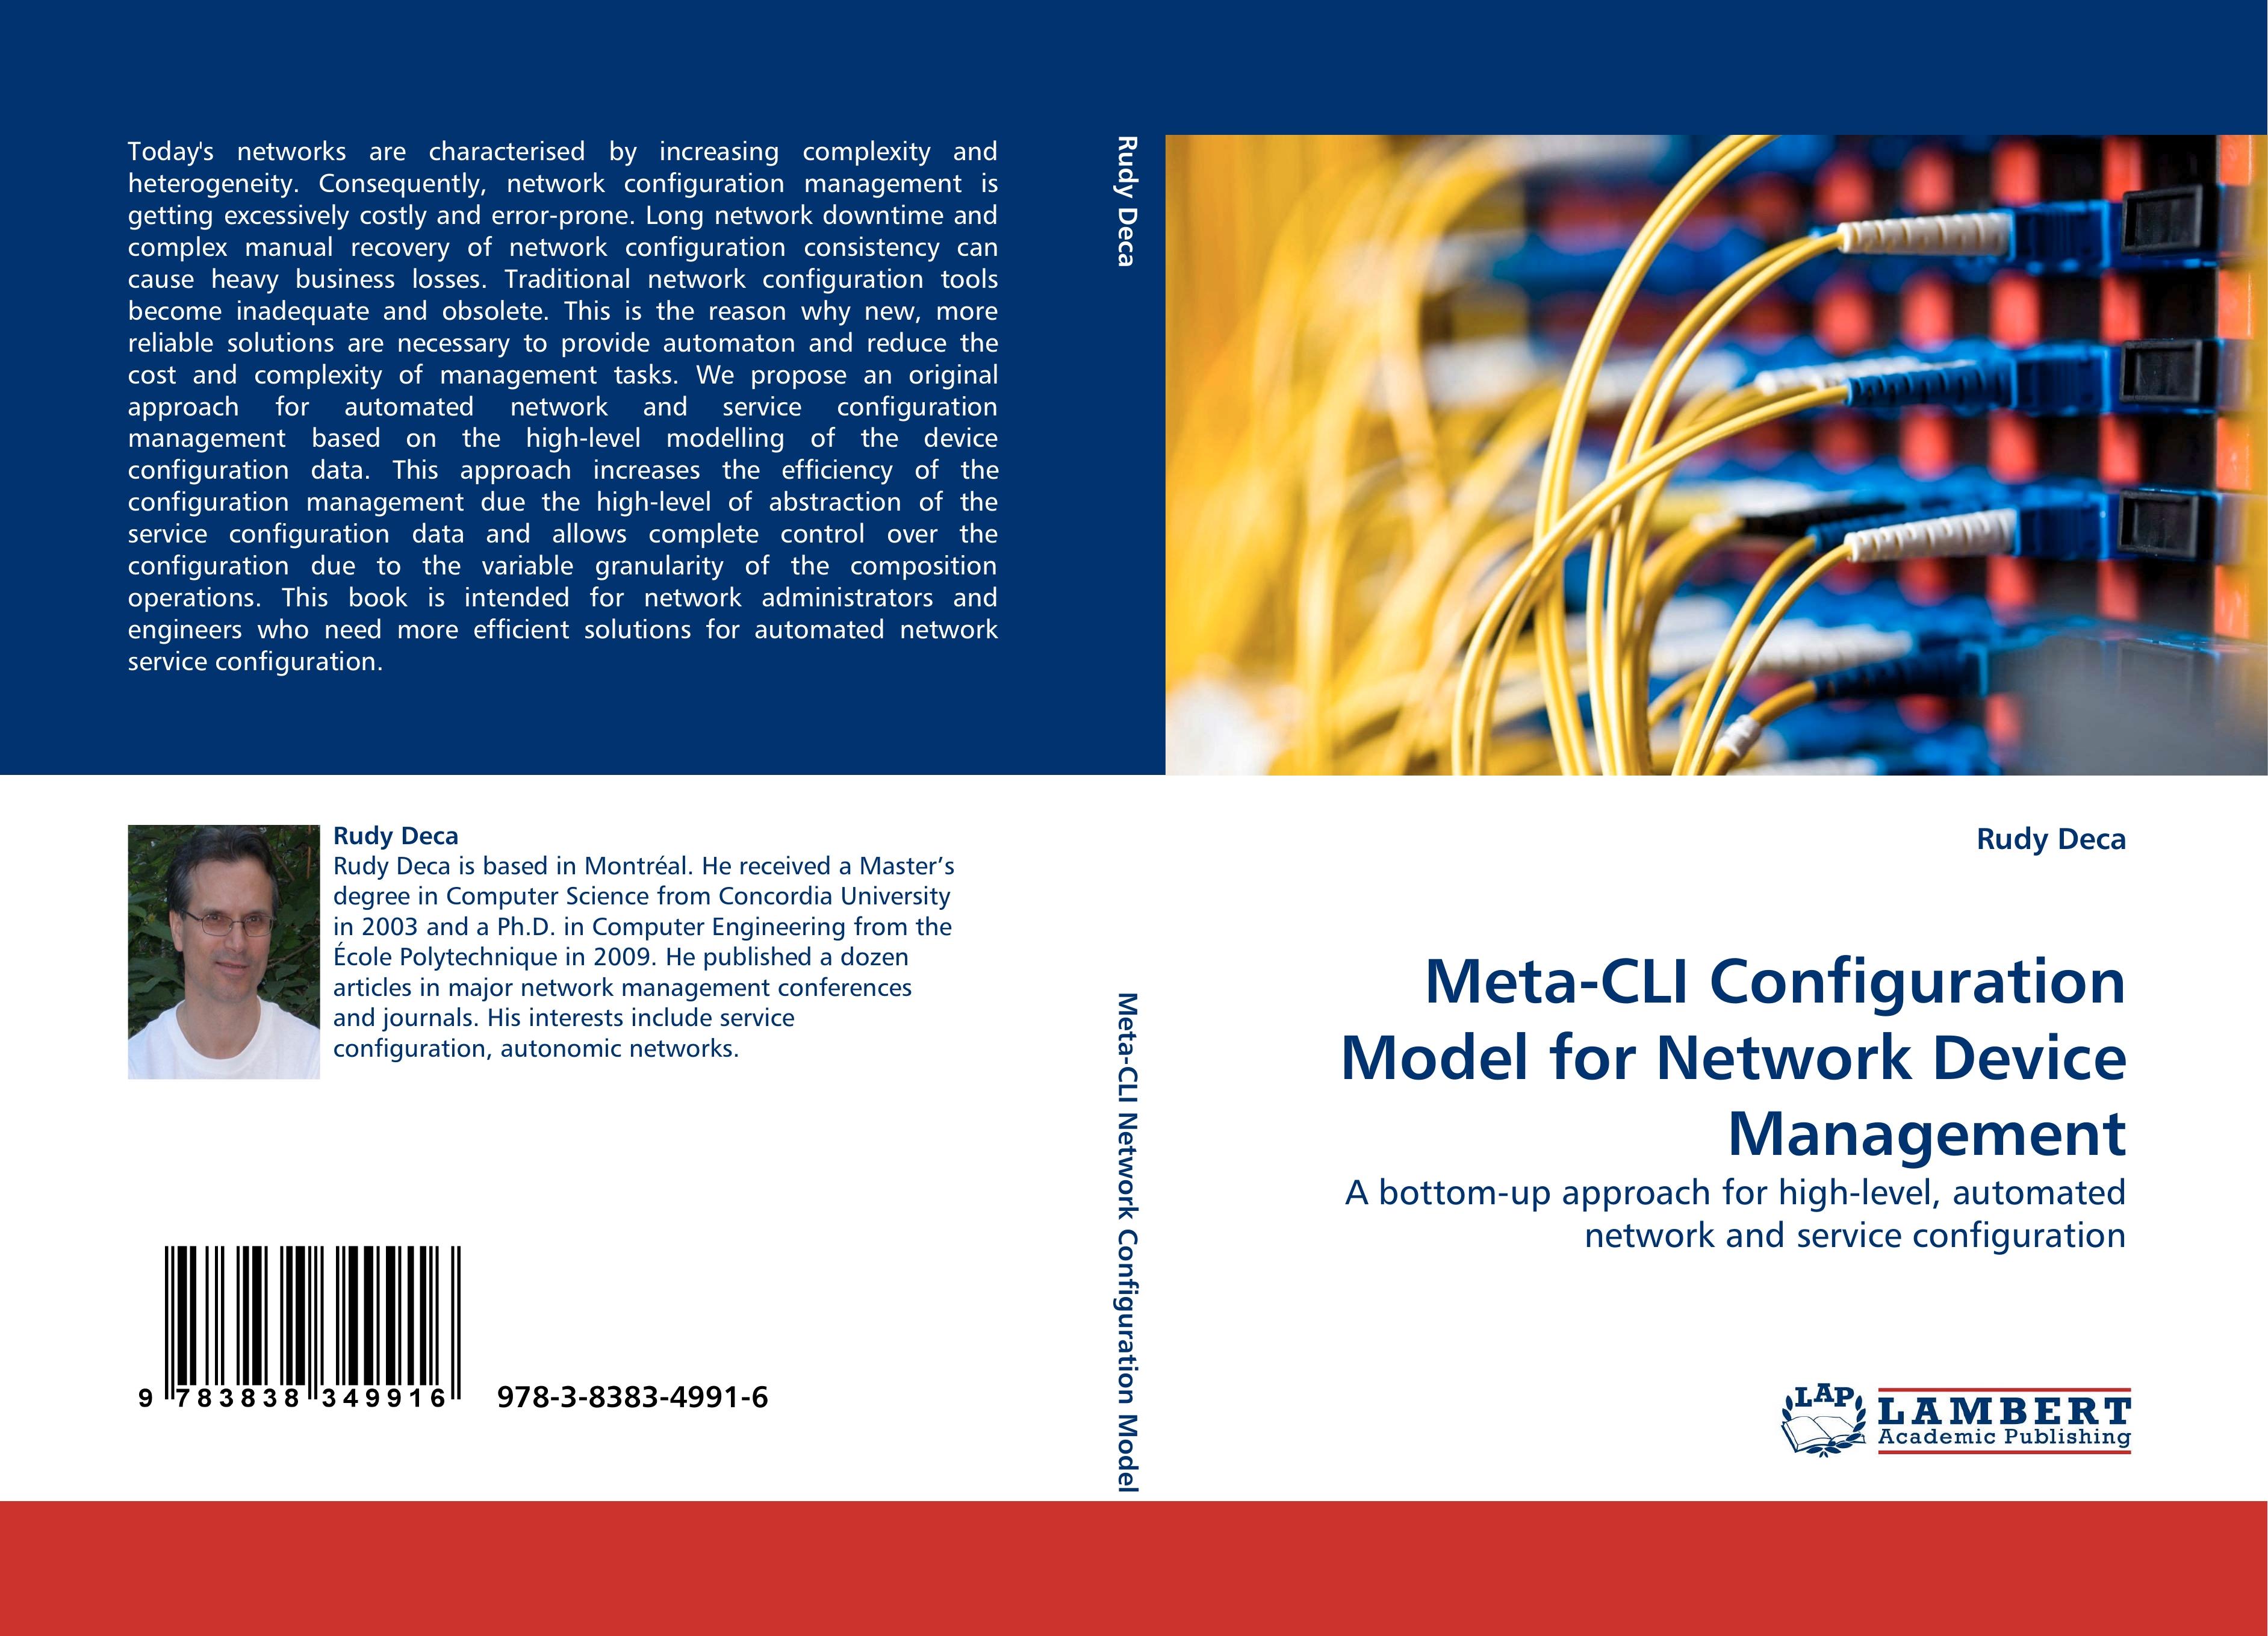 Meta-CLI Configuration Model for Network Device Management / A bottom-up approach for high-level, automated network and service configuration / Rudy Deca / Taschenbuch / Paperback / 148 S. / Englisch - Deca, Rudy